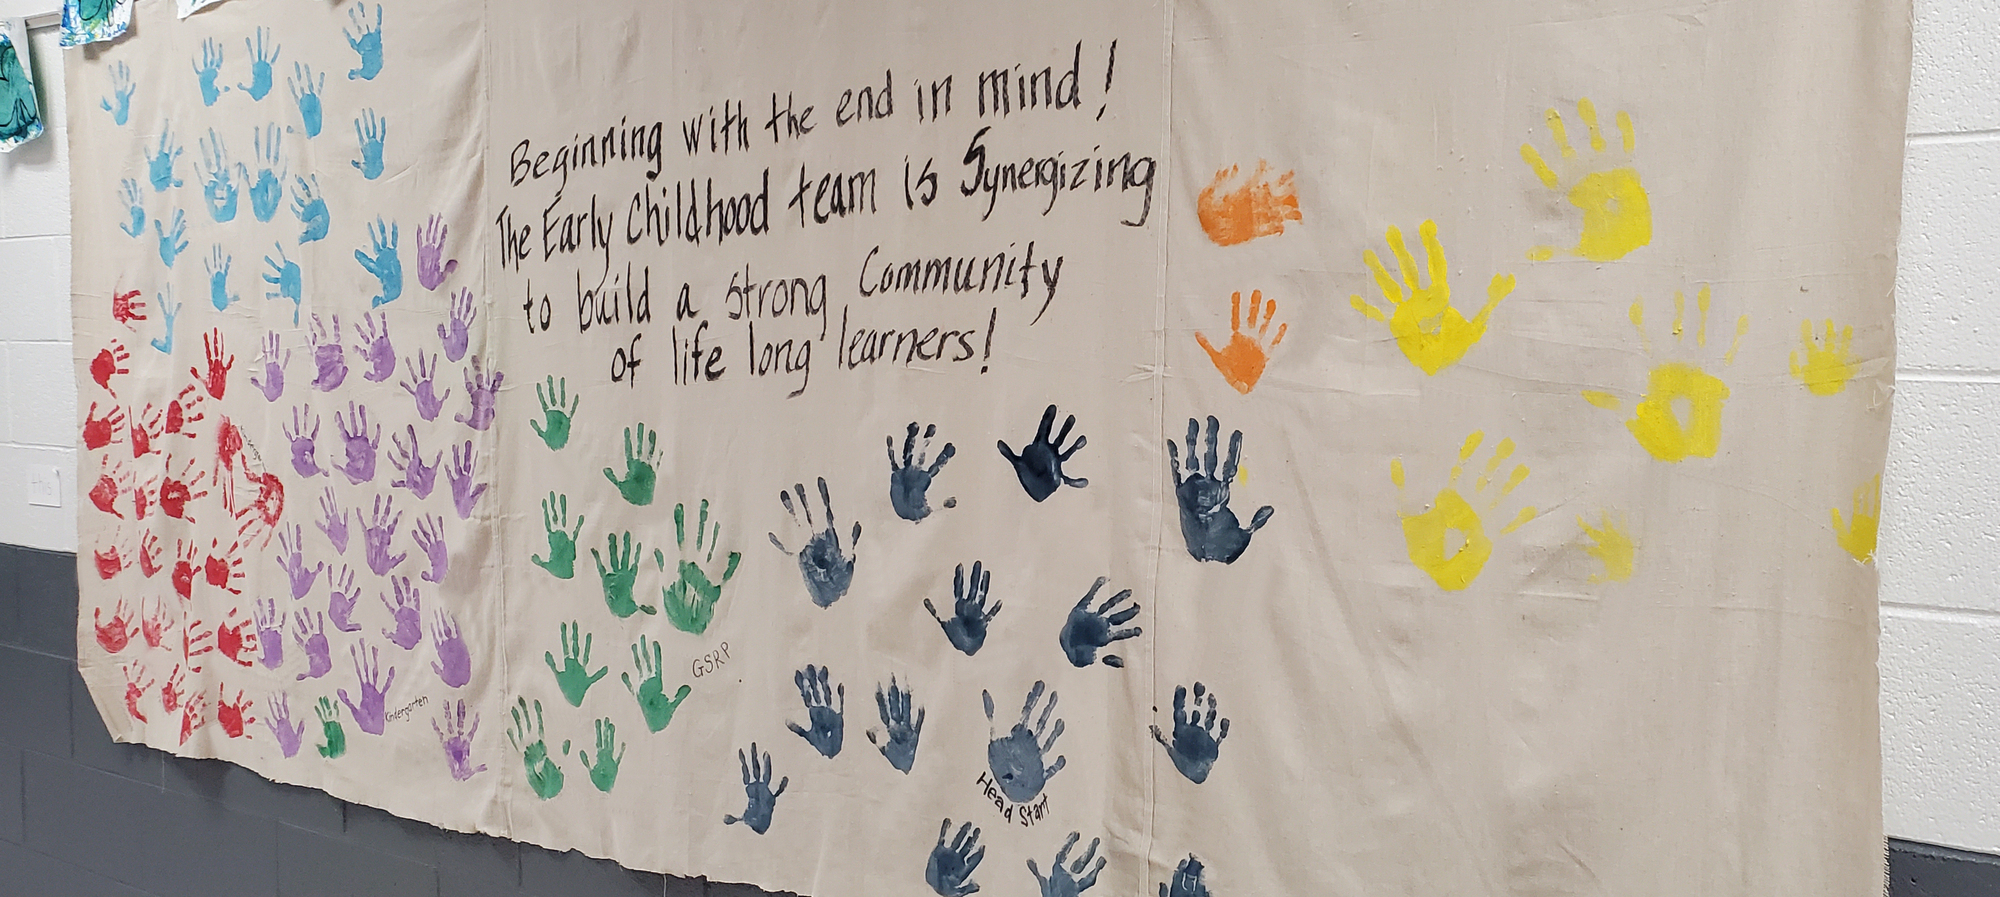 Sign with handprints with message"Beginning with the end in mind..."